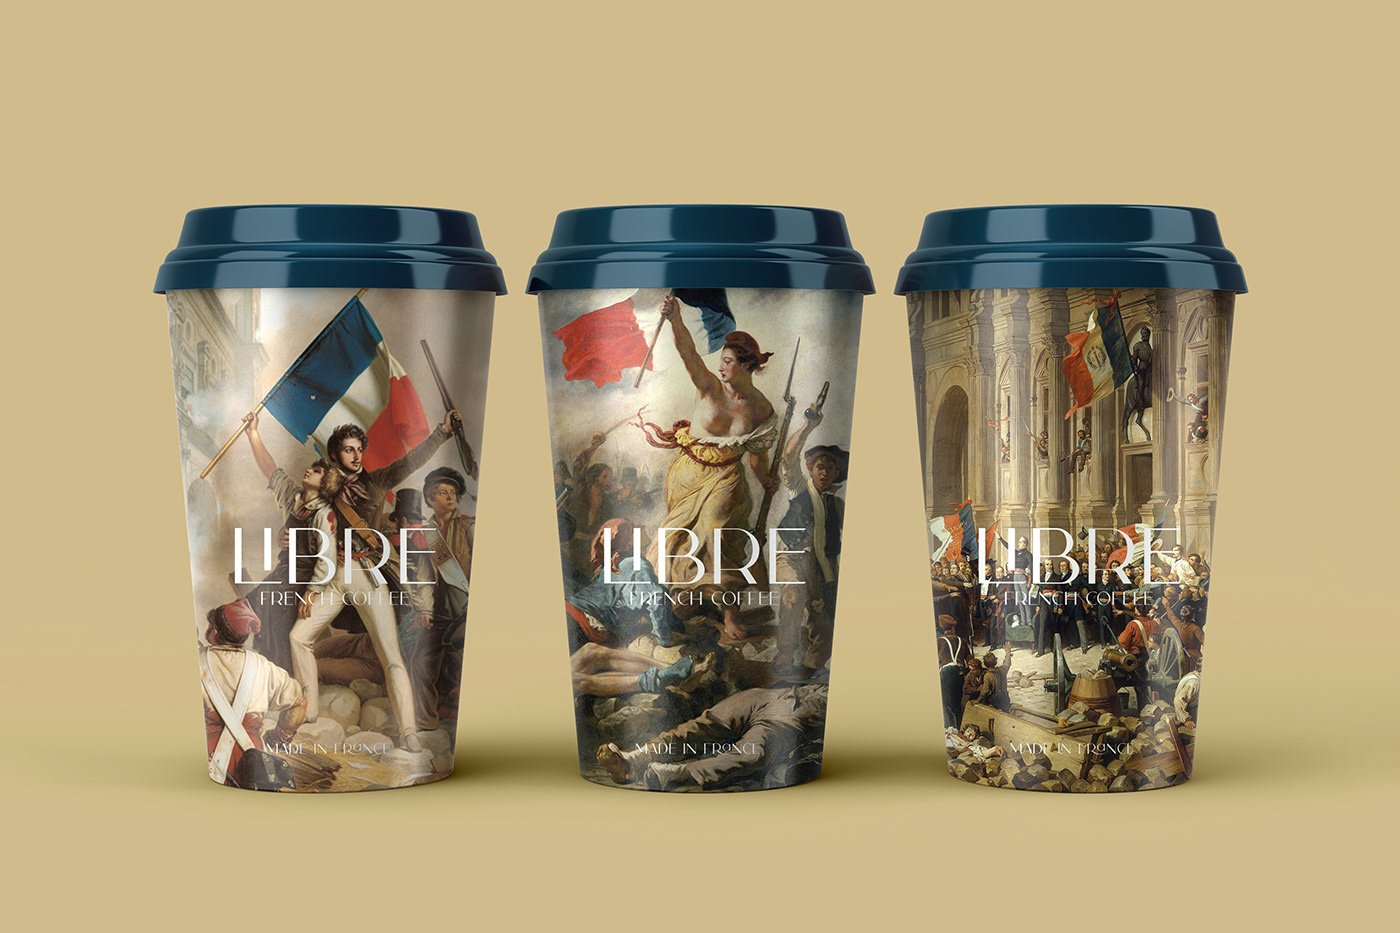 Libre French Coffee packaging designed by Arkan Gahramy